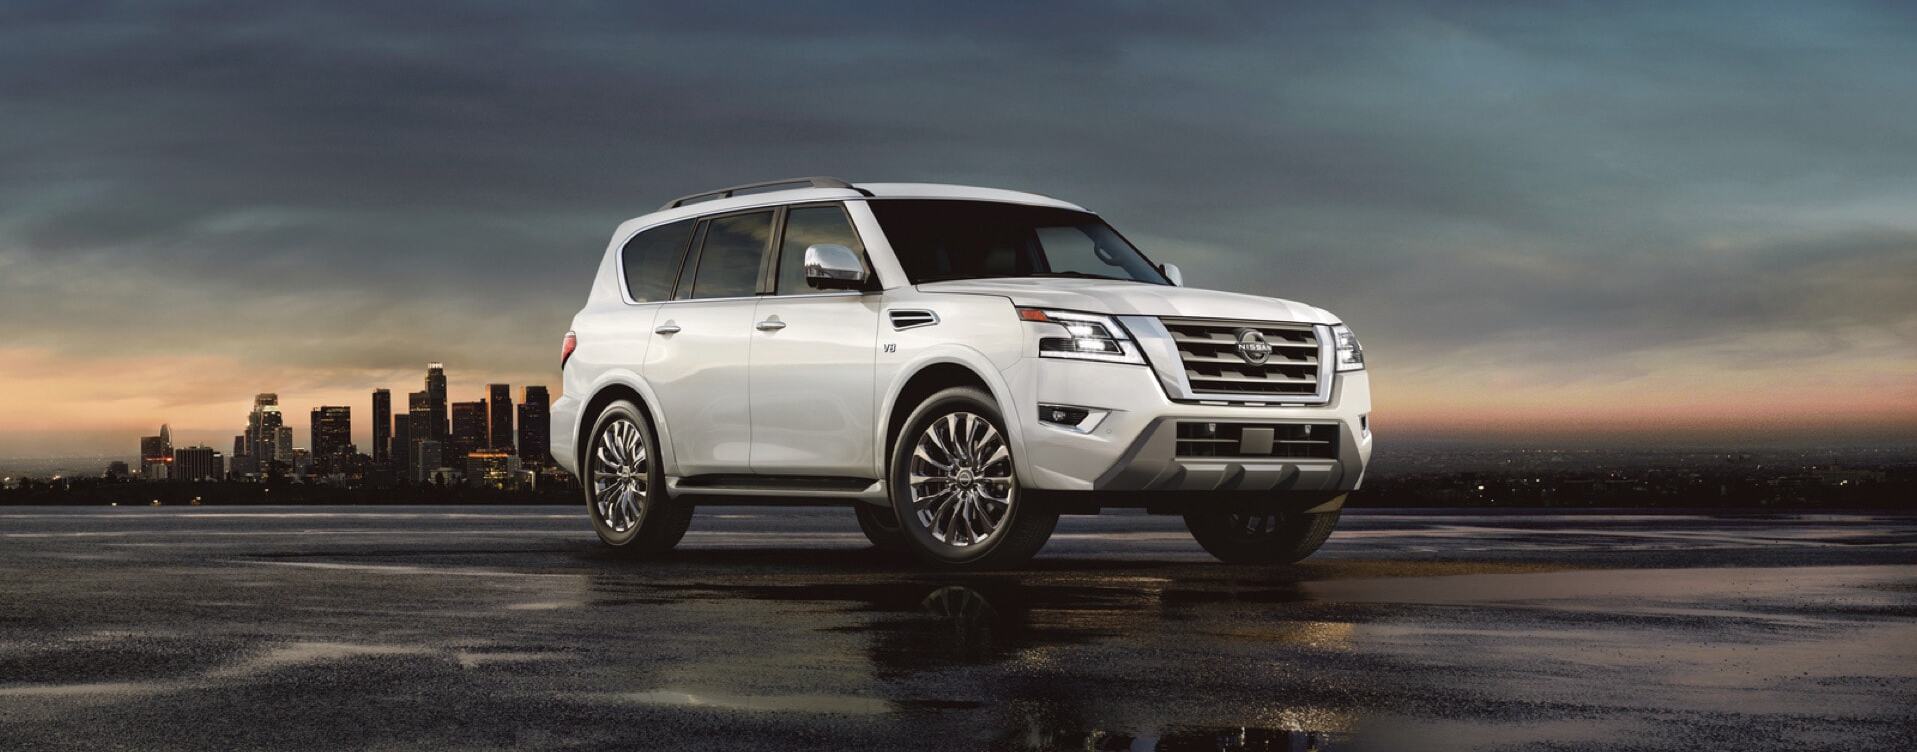 Nissan Dealers Say New Armada Will Be 'Range Rover-Like